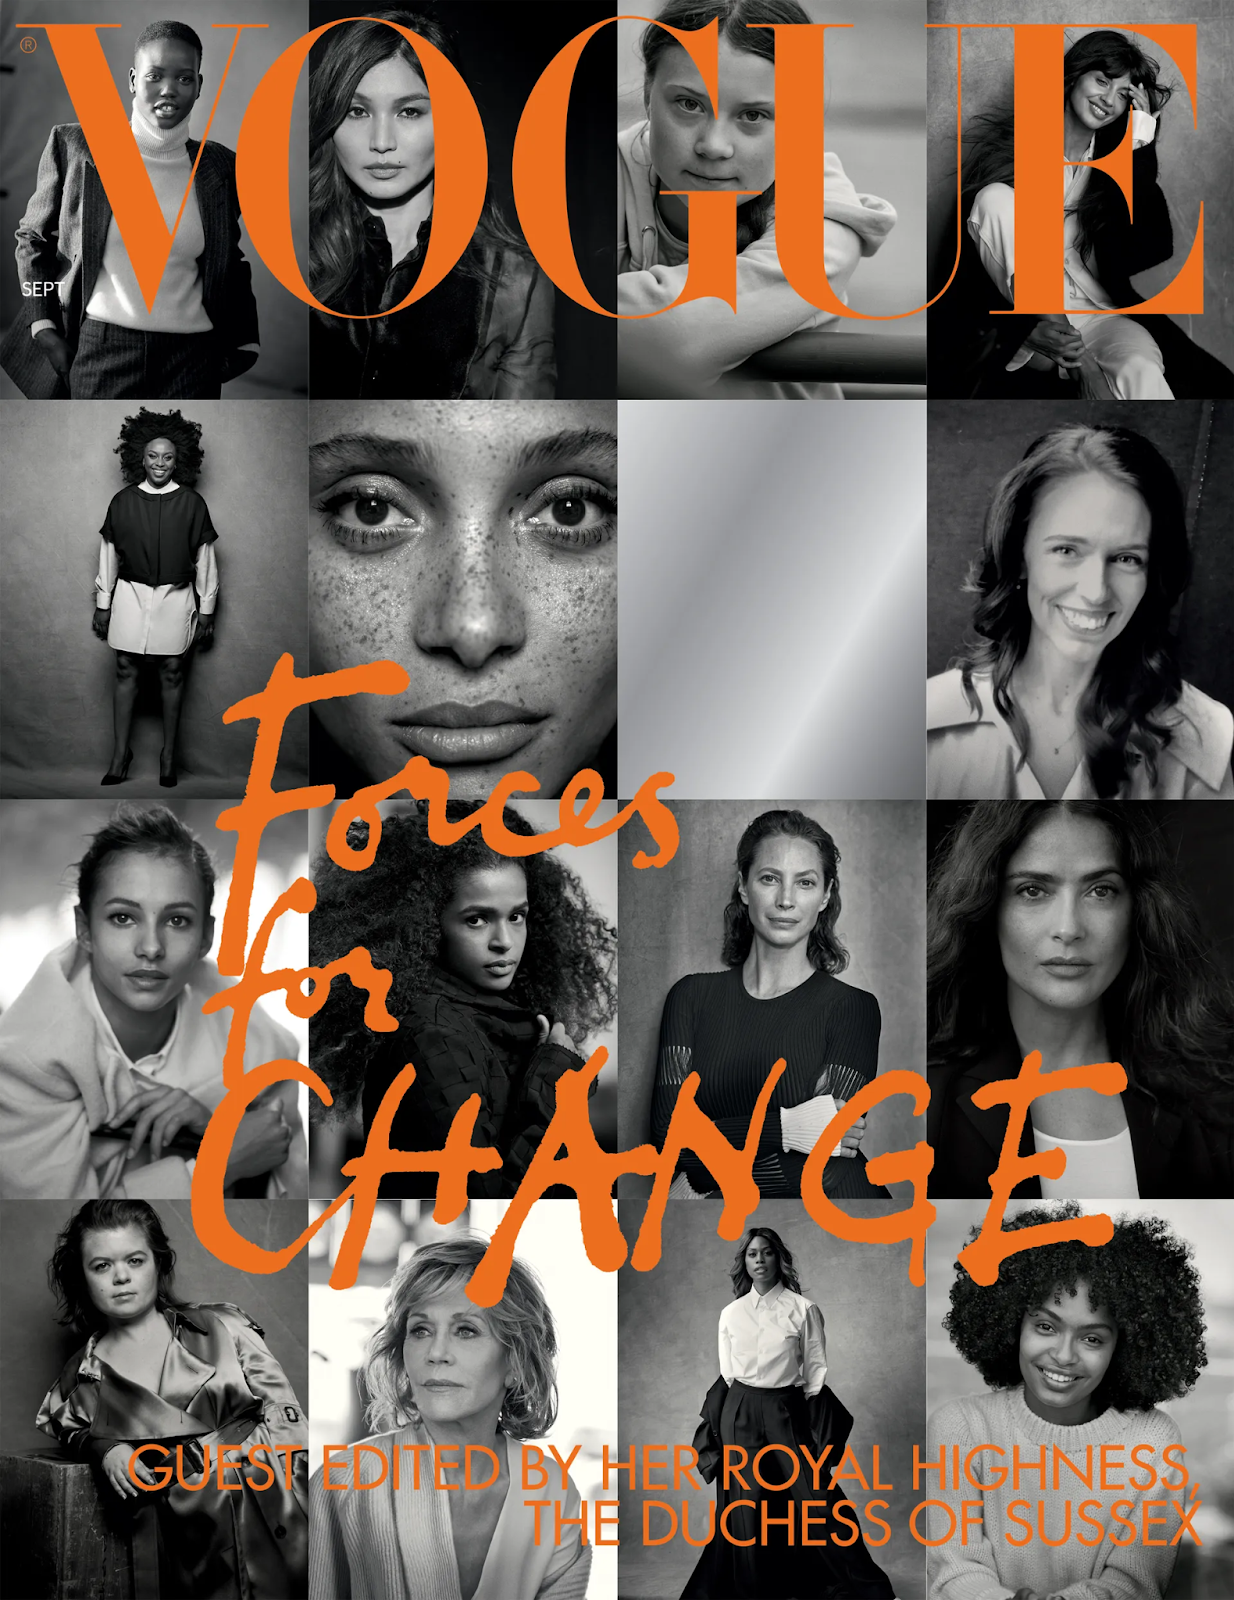  American Vogue’s September 2018 cover